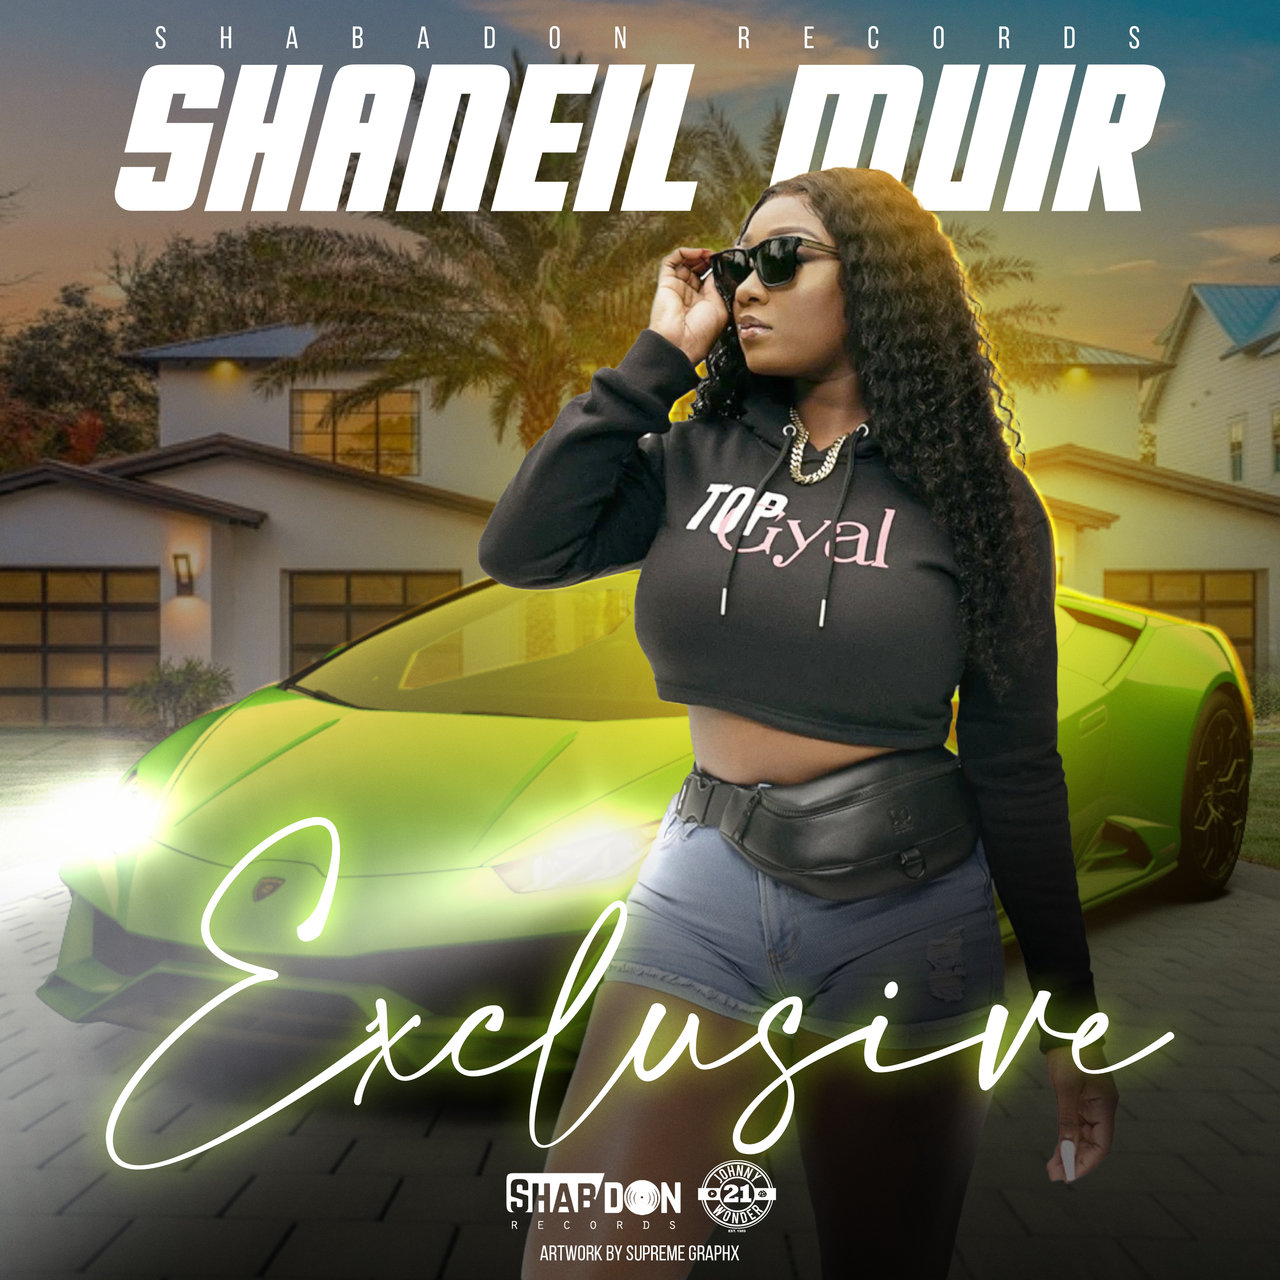 Shaneil Muir - Exclusive (Cover)